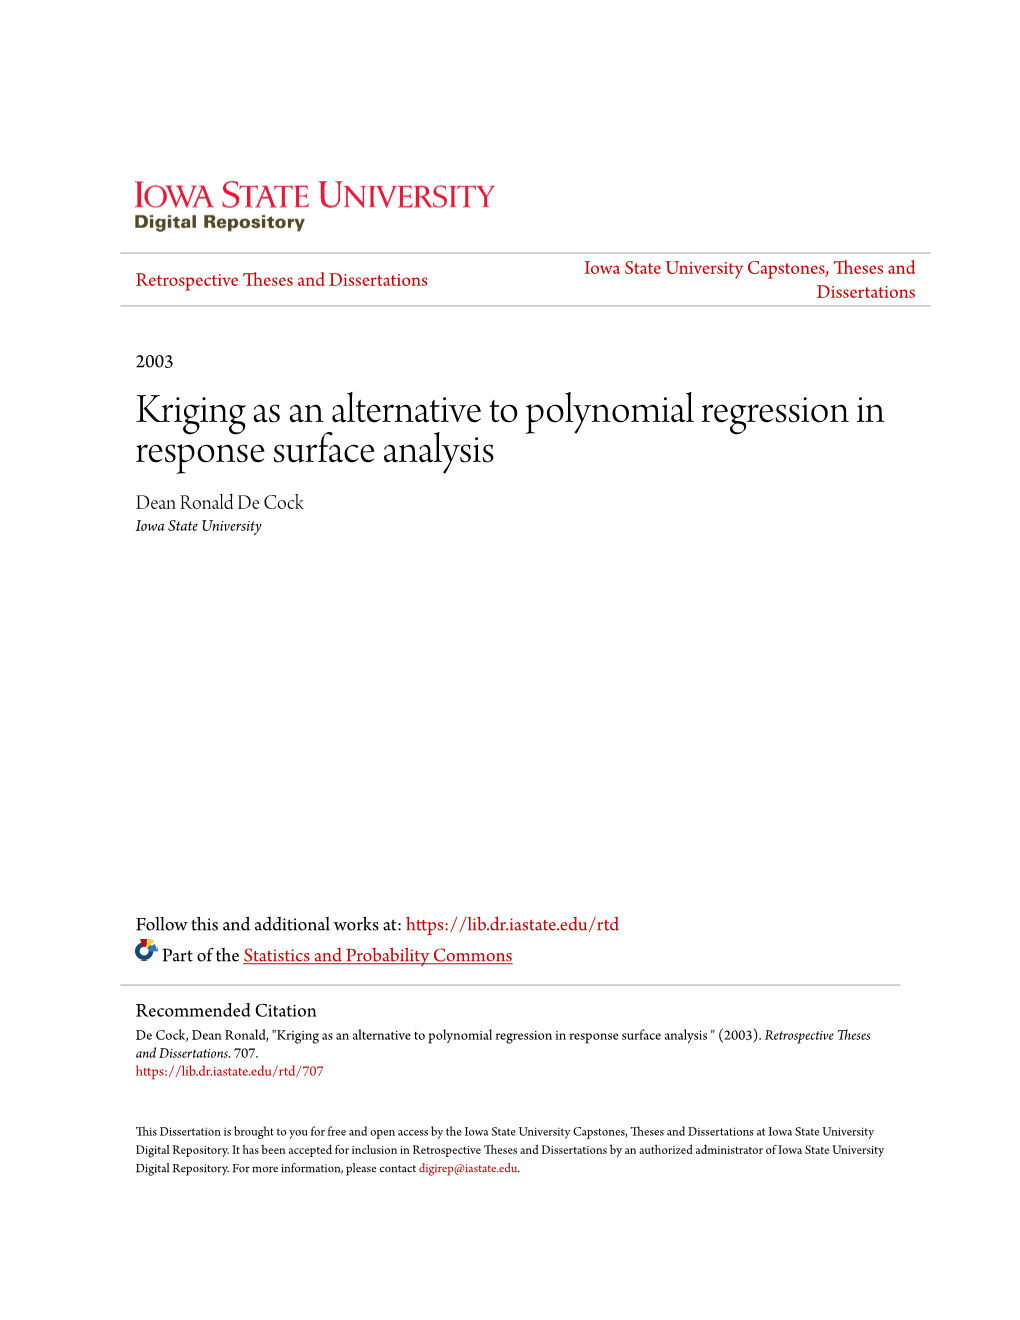 Kriging As an Alternative to Polynomial Regression in Response Surface Analysis Dean Ronald De Cock Iowa State University